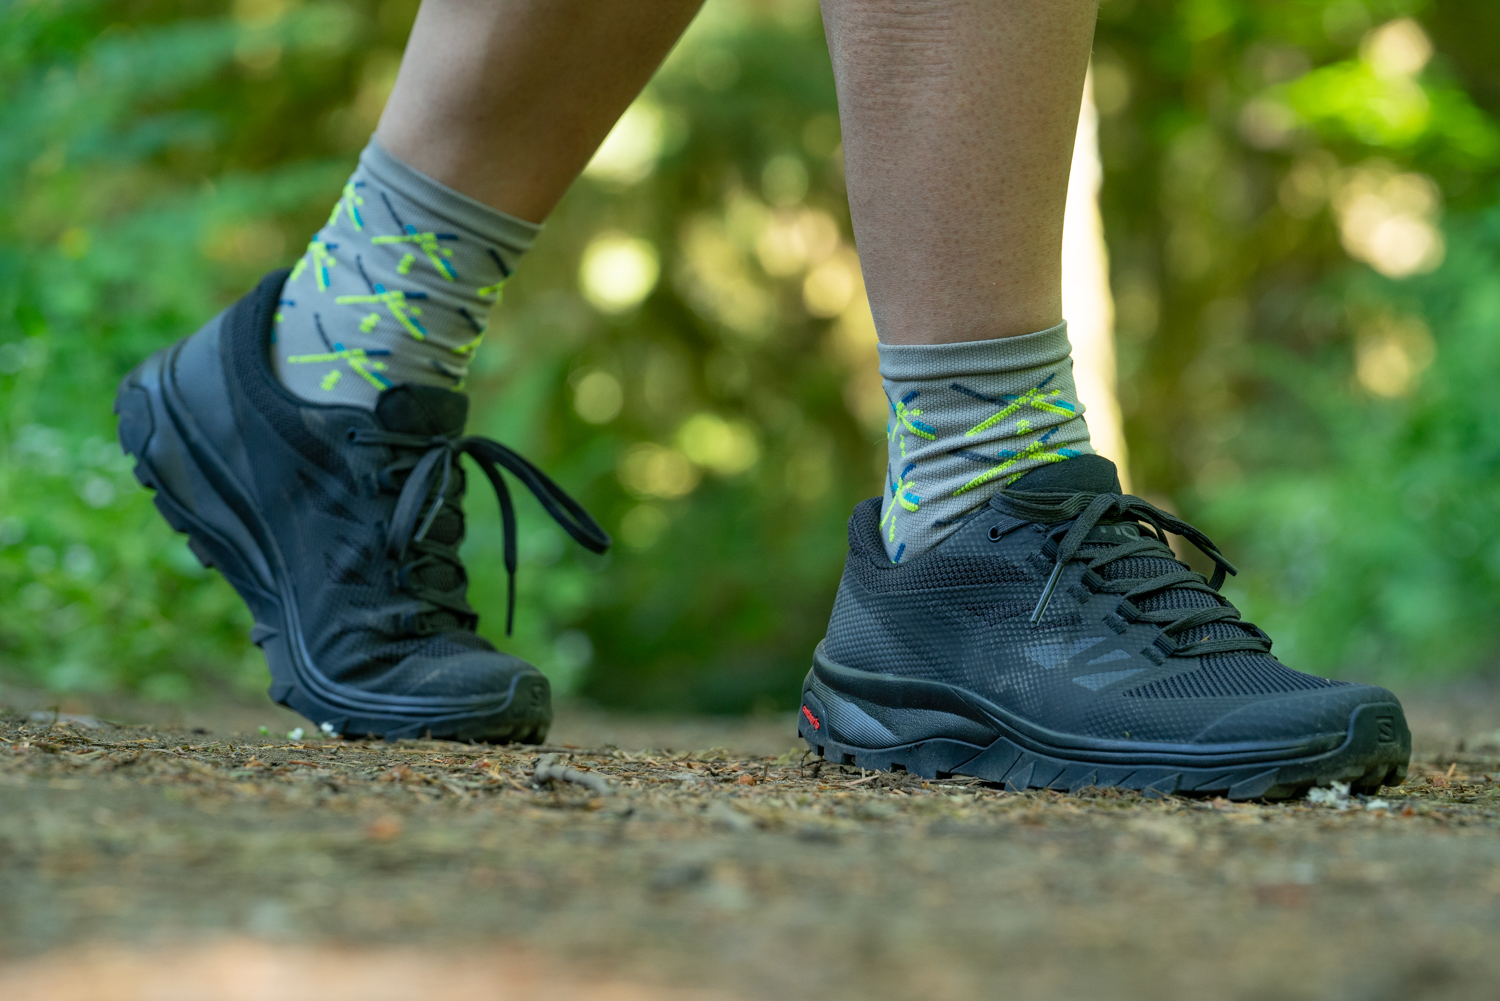 Guide To Buying Hiking Shoes & Boots | Snowys Blog